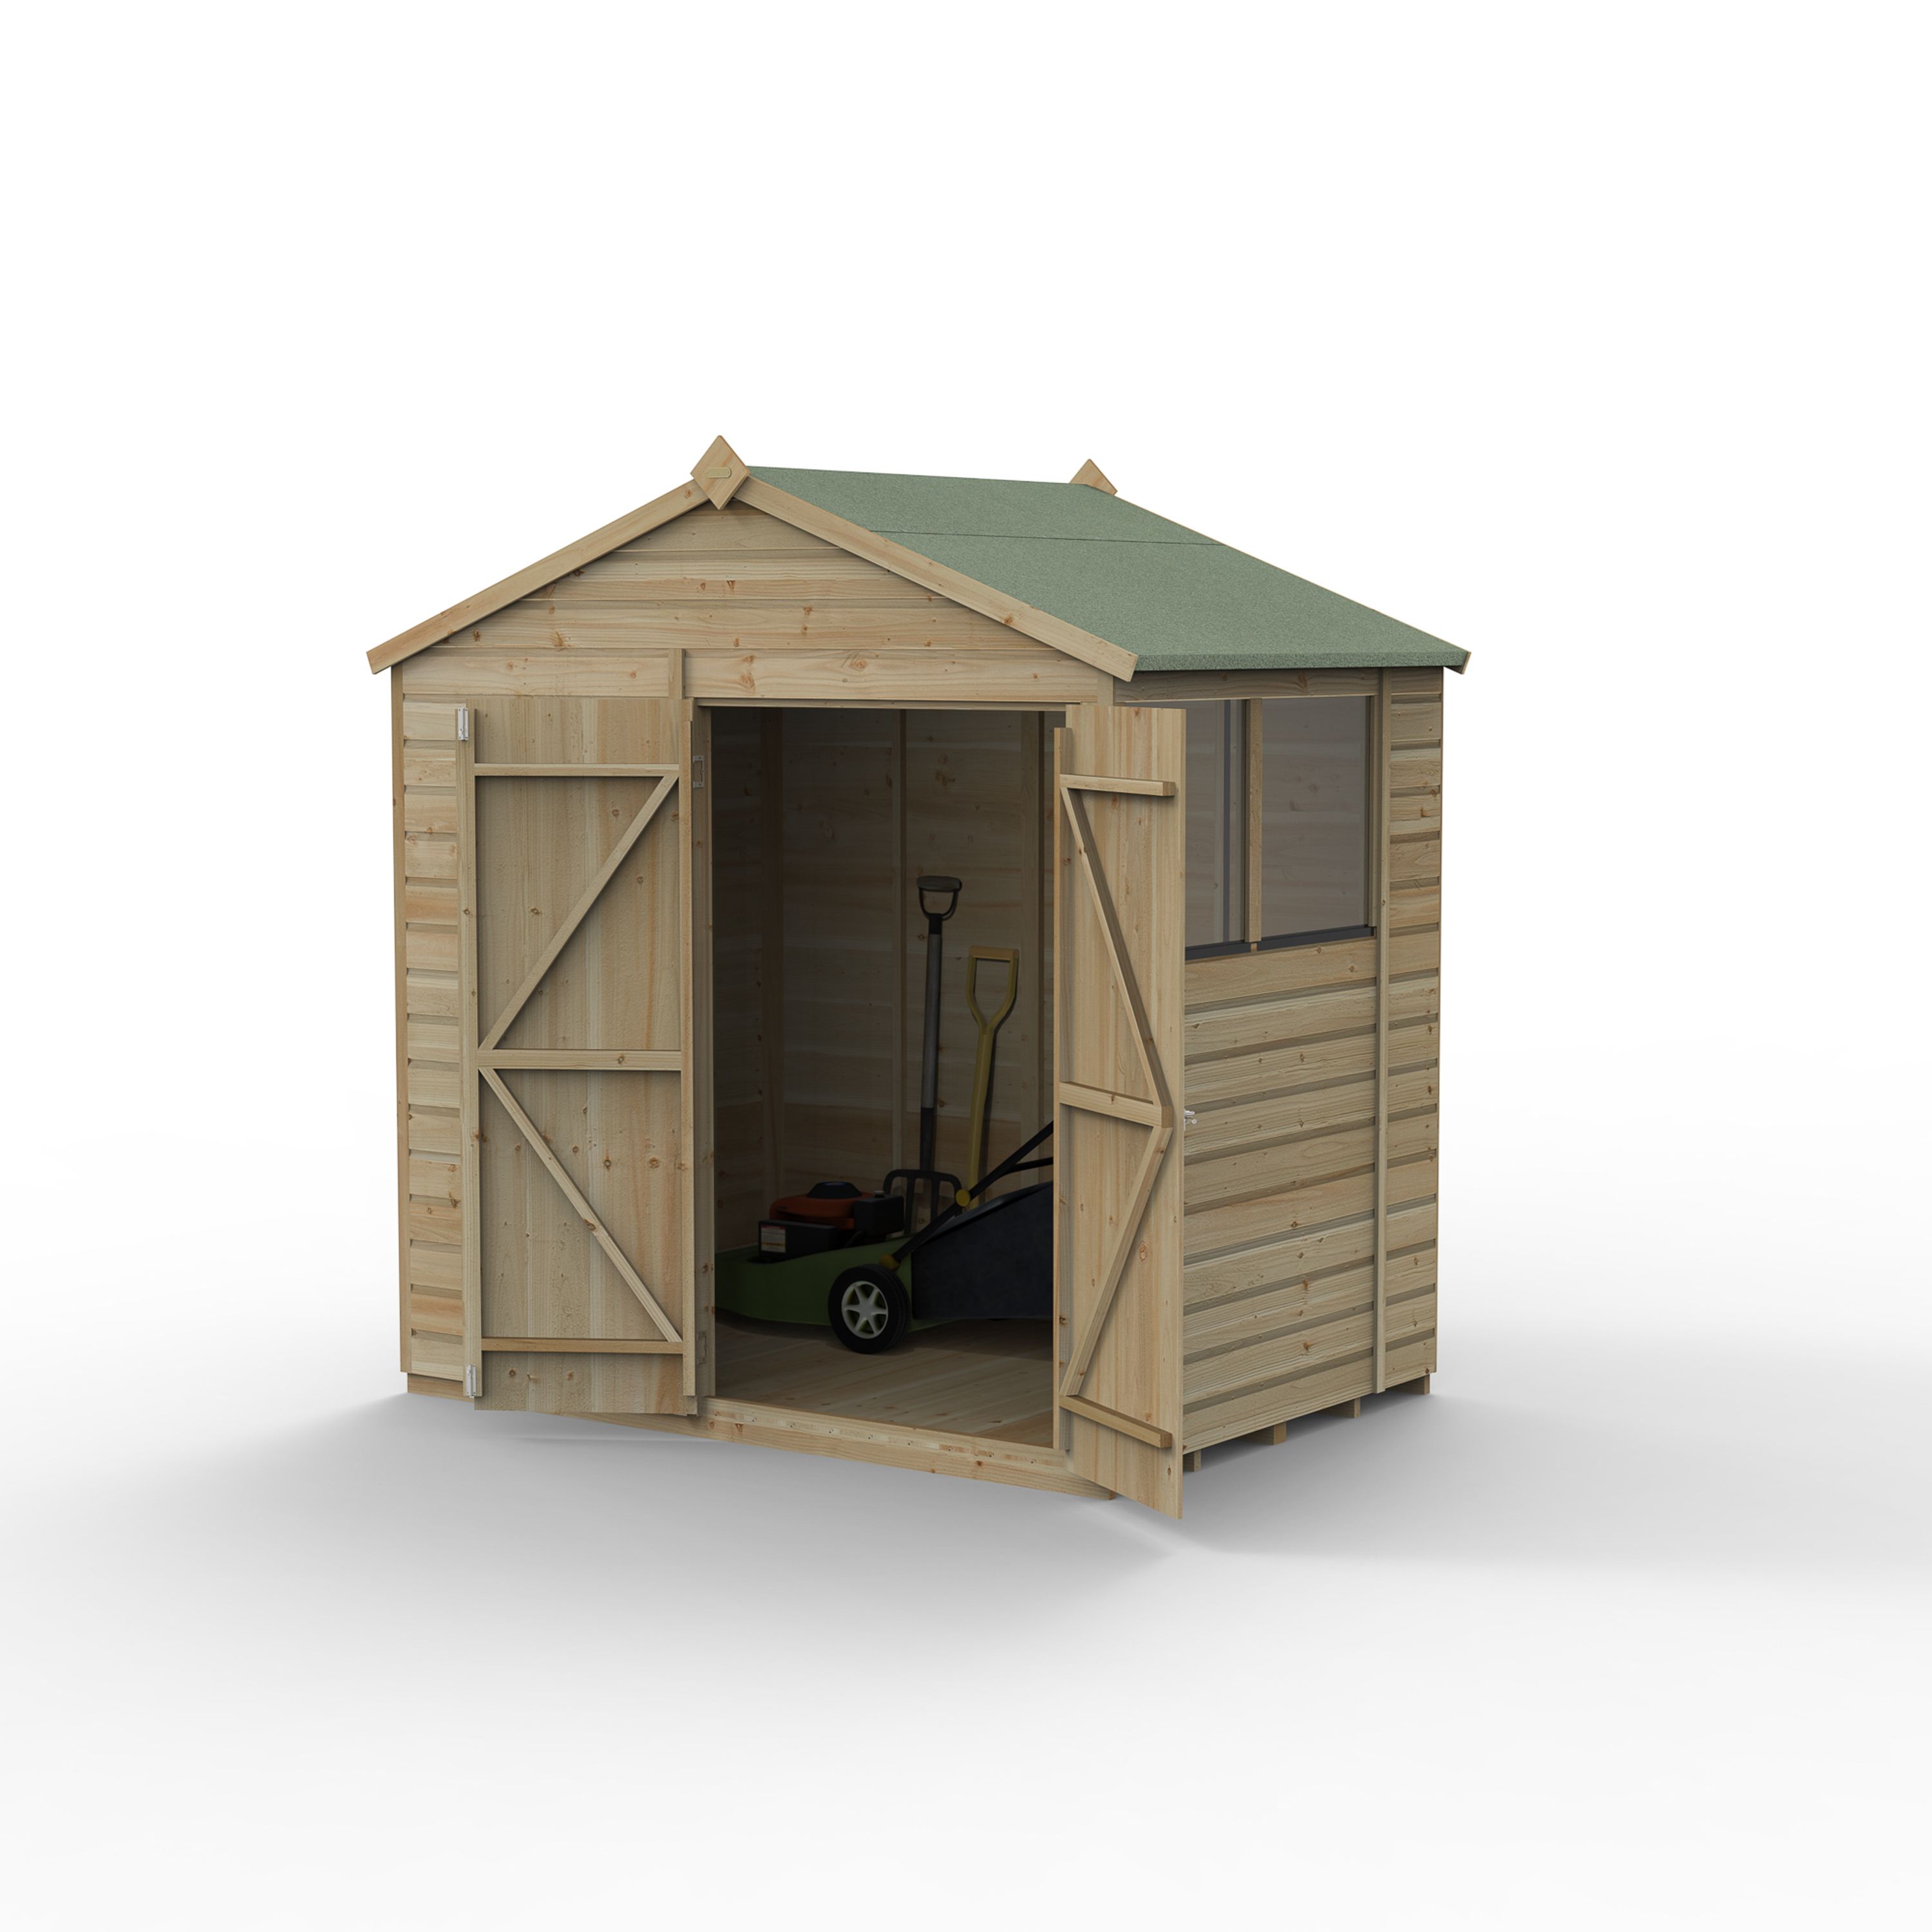 Forest Garden Beckwood 7x5 ft Pent Natural timber Wooden 2 door Shed with floor & 2 windows - Assembly not required